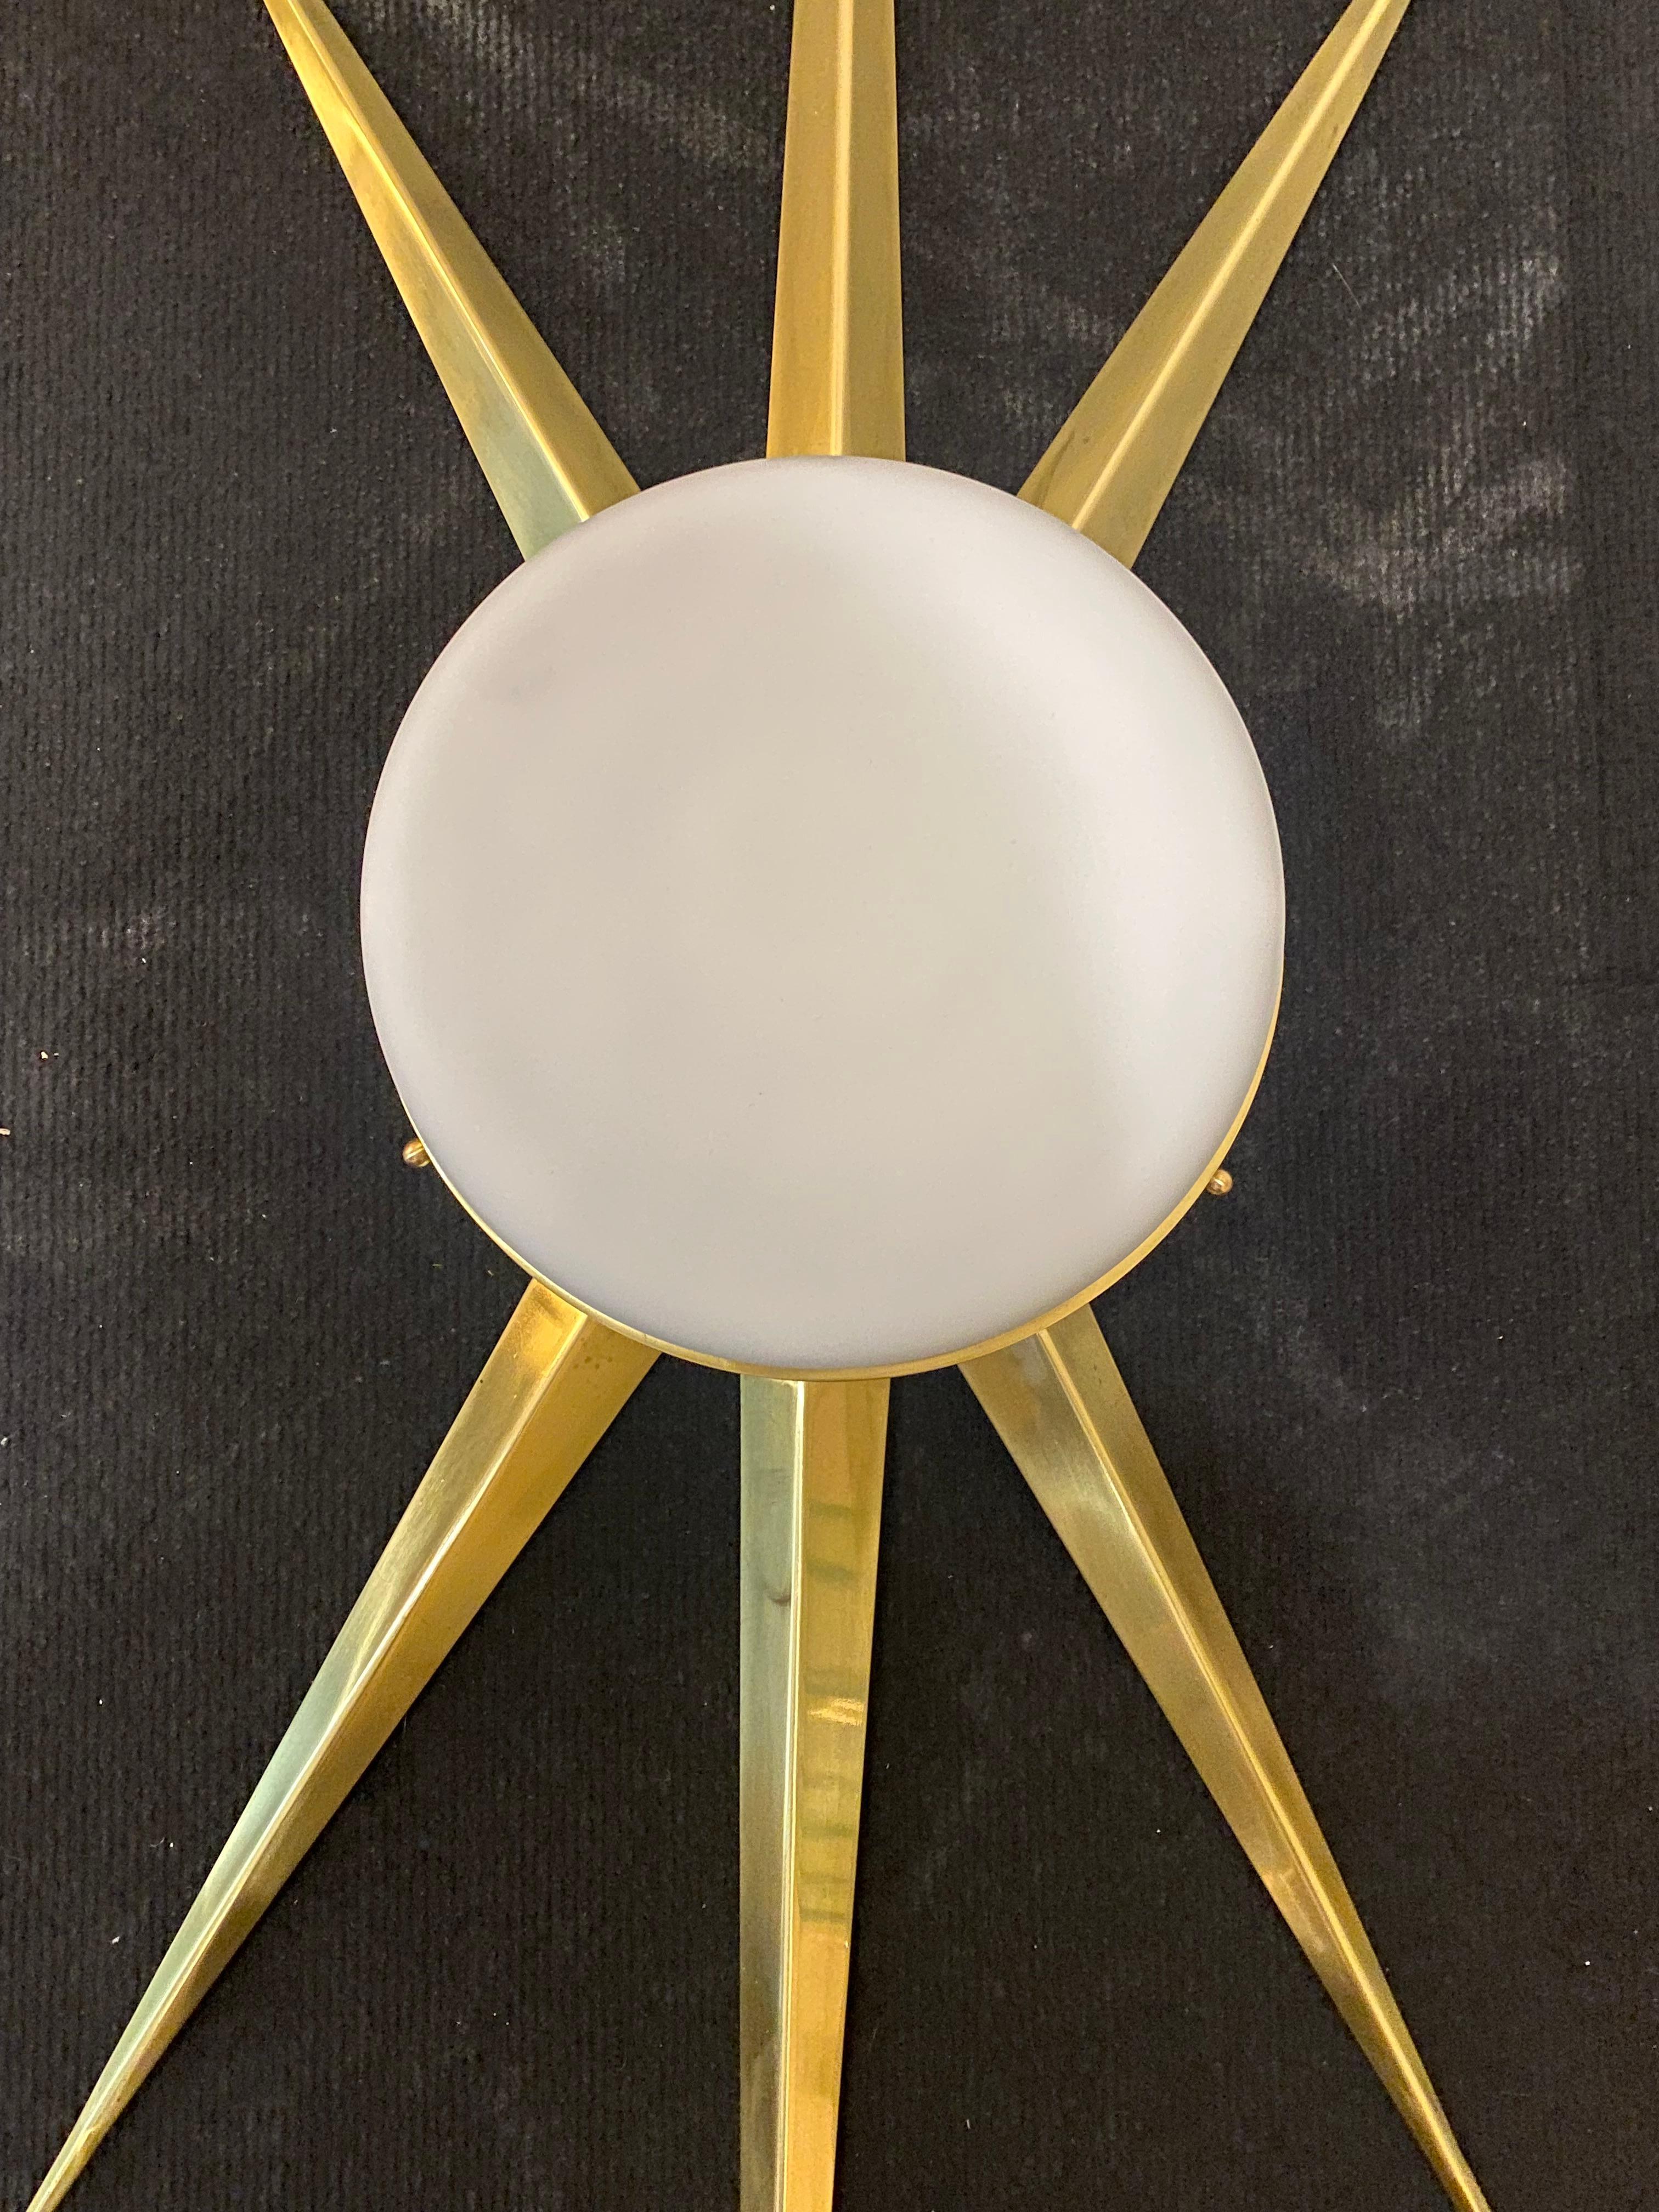 Late 20th Century Pair of Modernist Star-Shaped Sconces For Sale